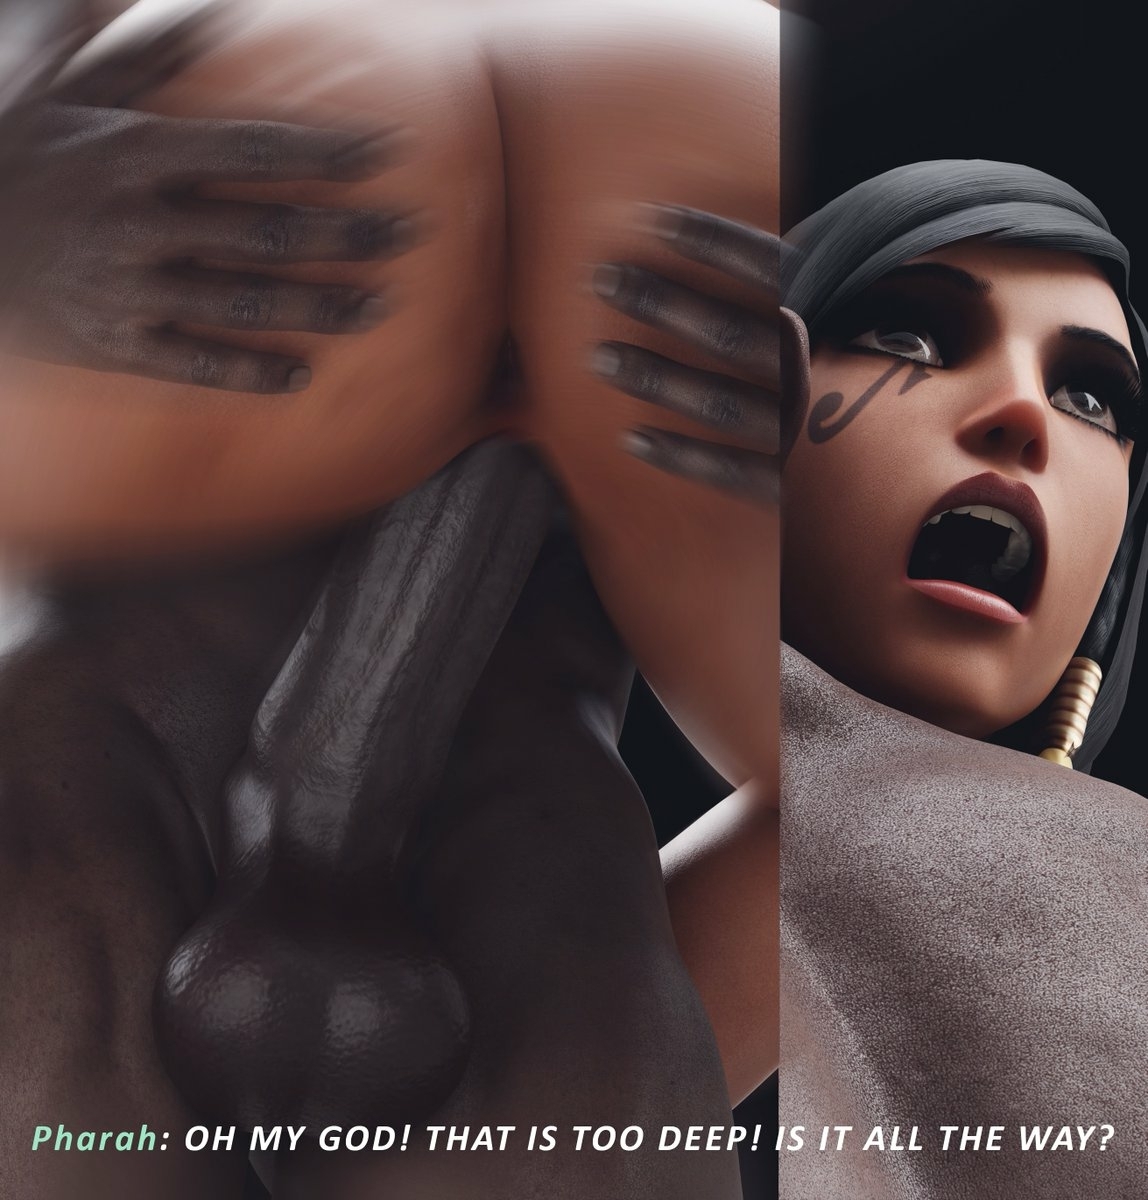 family bonding fucking black ver Ana (overwatch) Pharah Overwatch Anal Anal Penetration Fuck From Behind Sucking Cock Sucking Boobs Big boobs Nipples Naked Fully Naked Nsfw Vaginal Vaginal Penetration 3d Porn 4